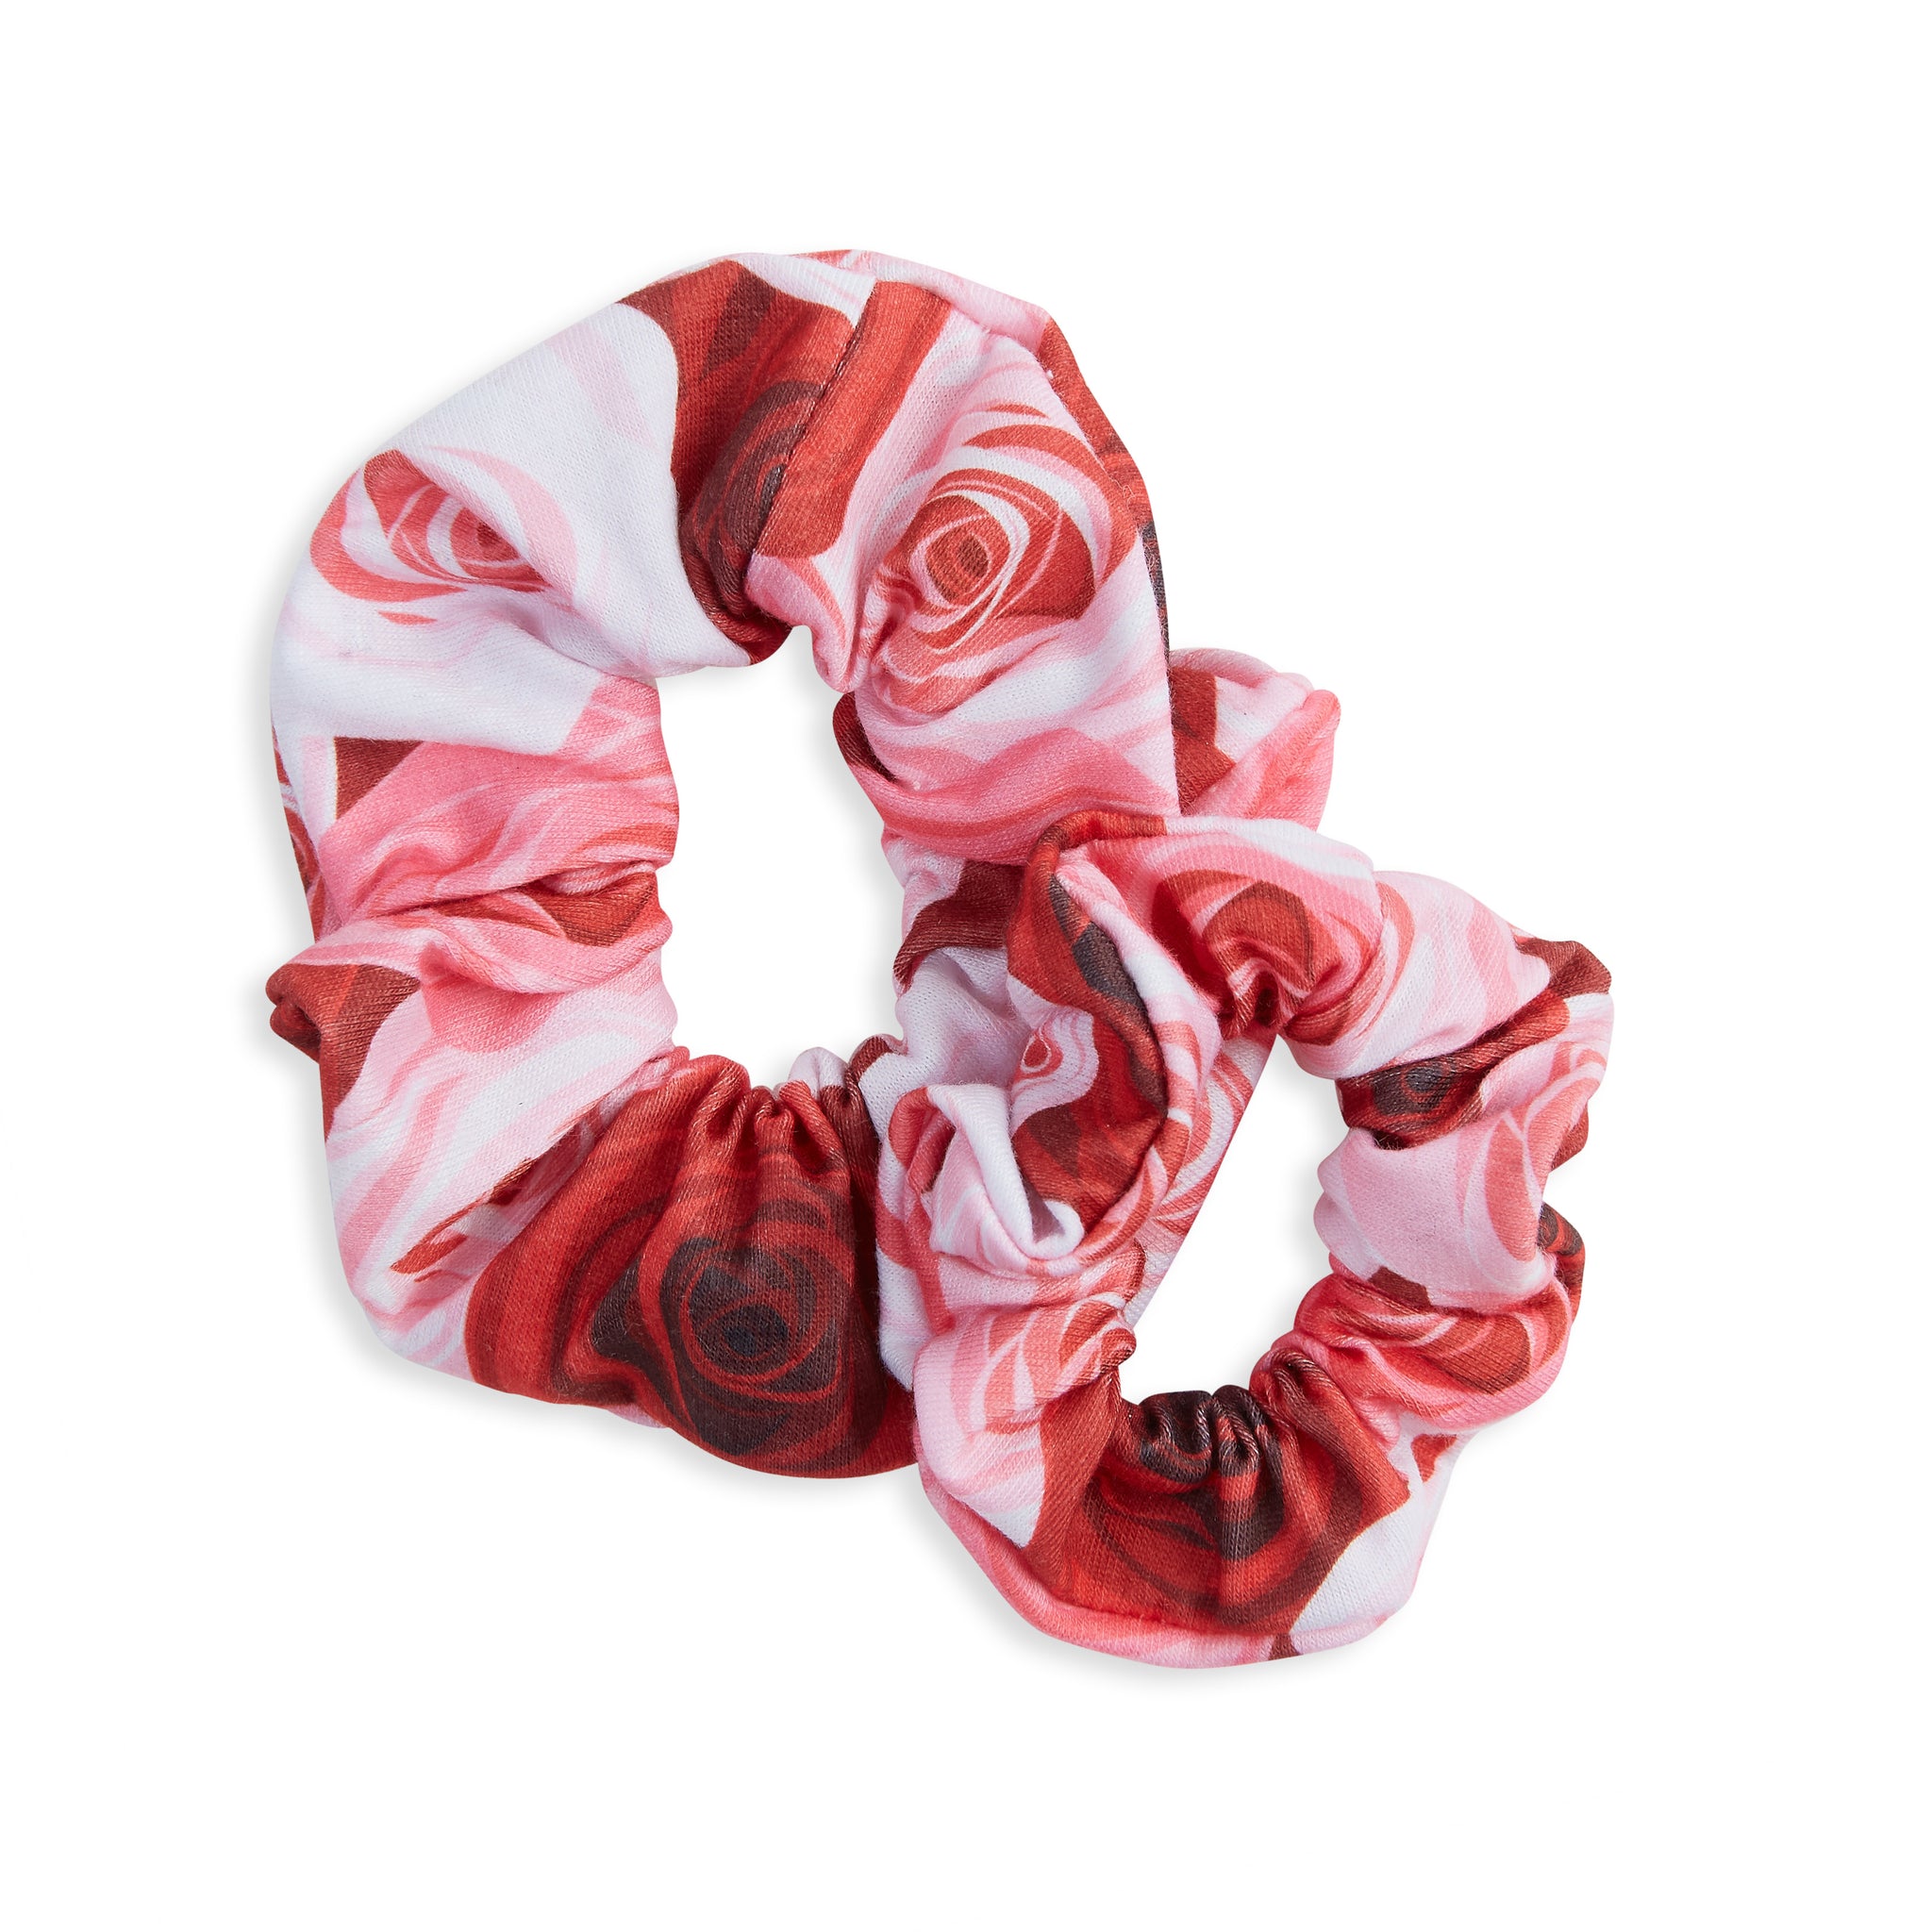 ROSE scrunchies - CHILD & ADULT